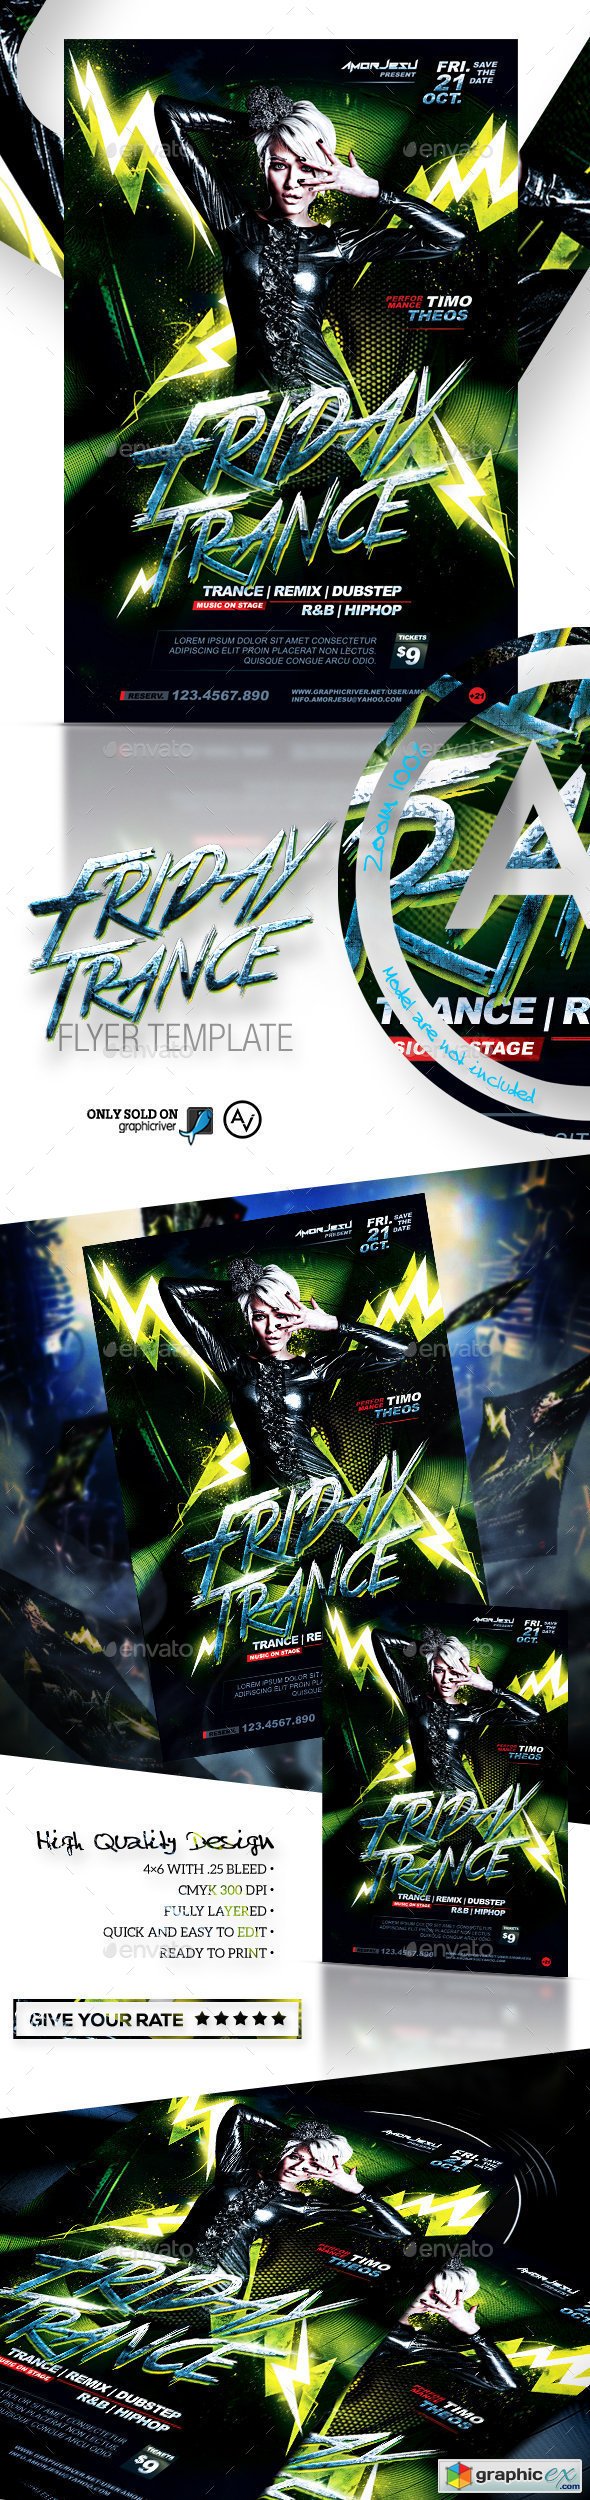 Friday Trance Flyer Template